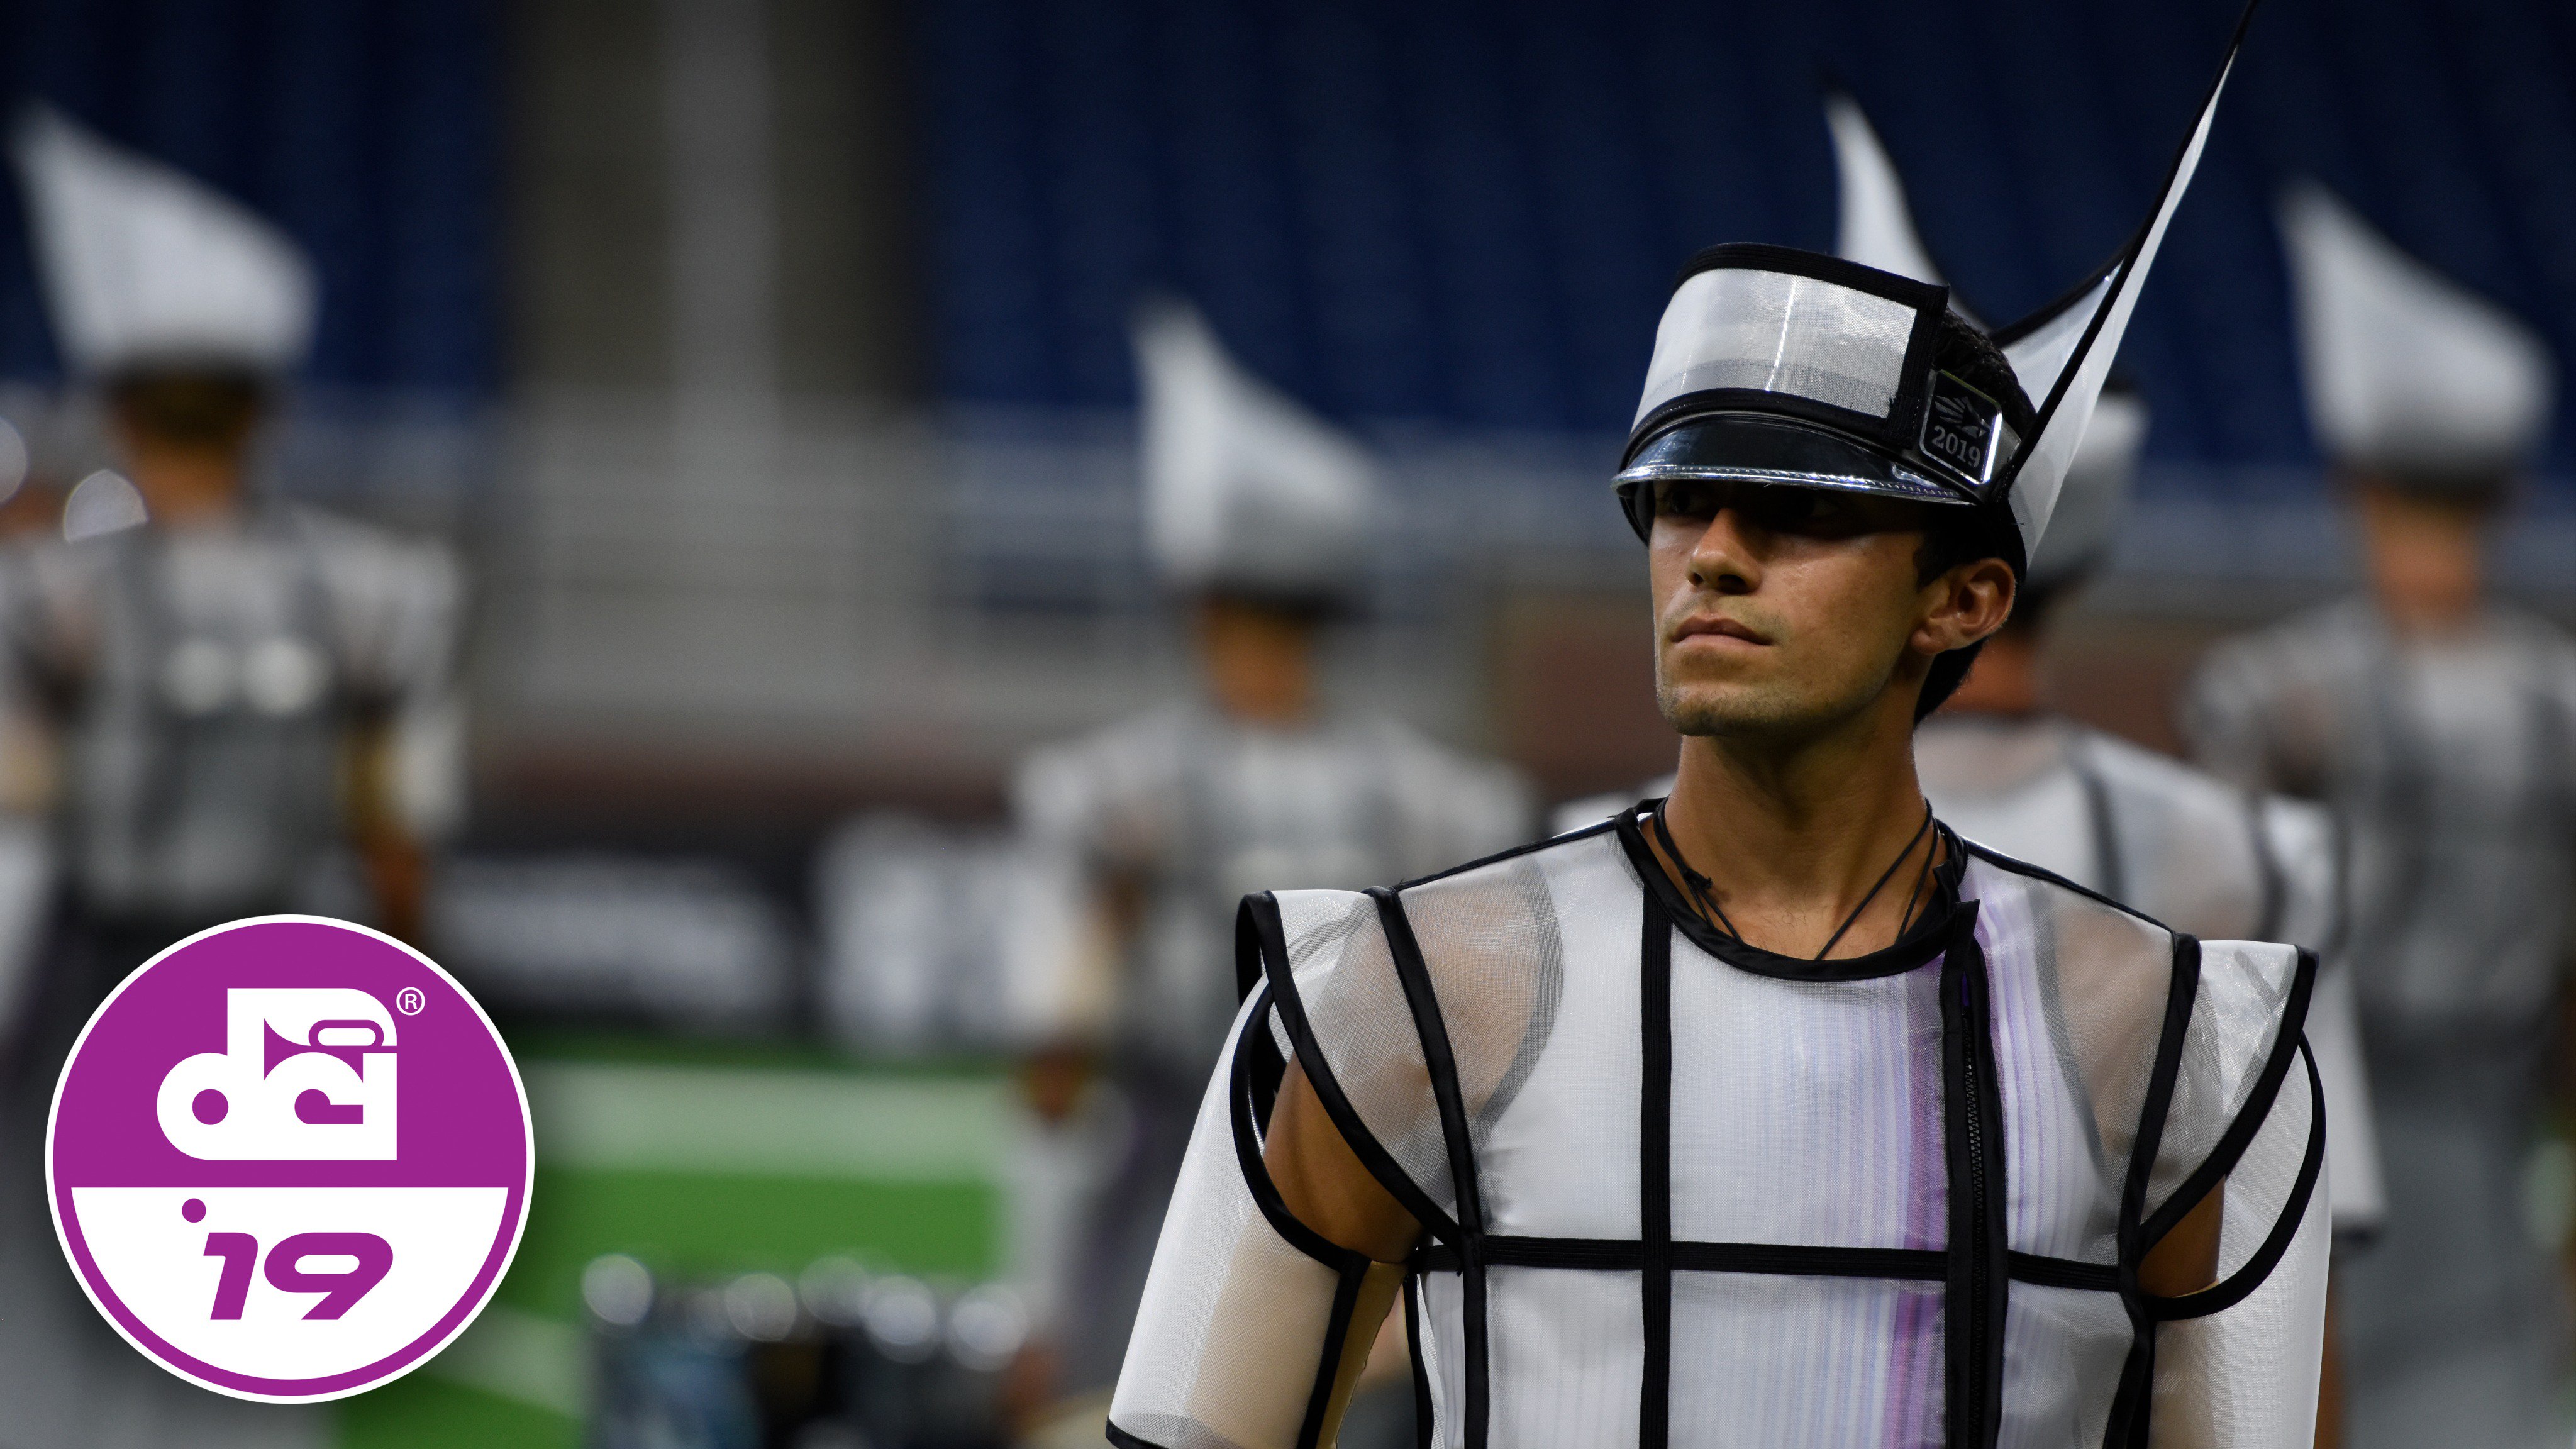 Drum Corps International on X: Wall. Of. Sound. #DCI2019